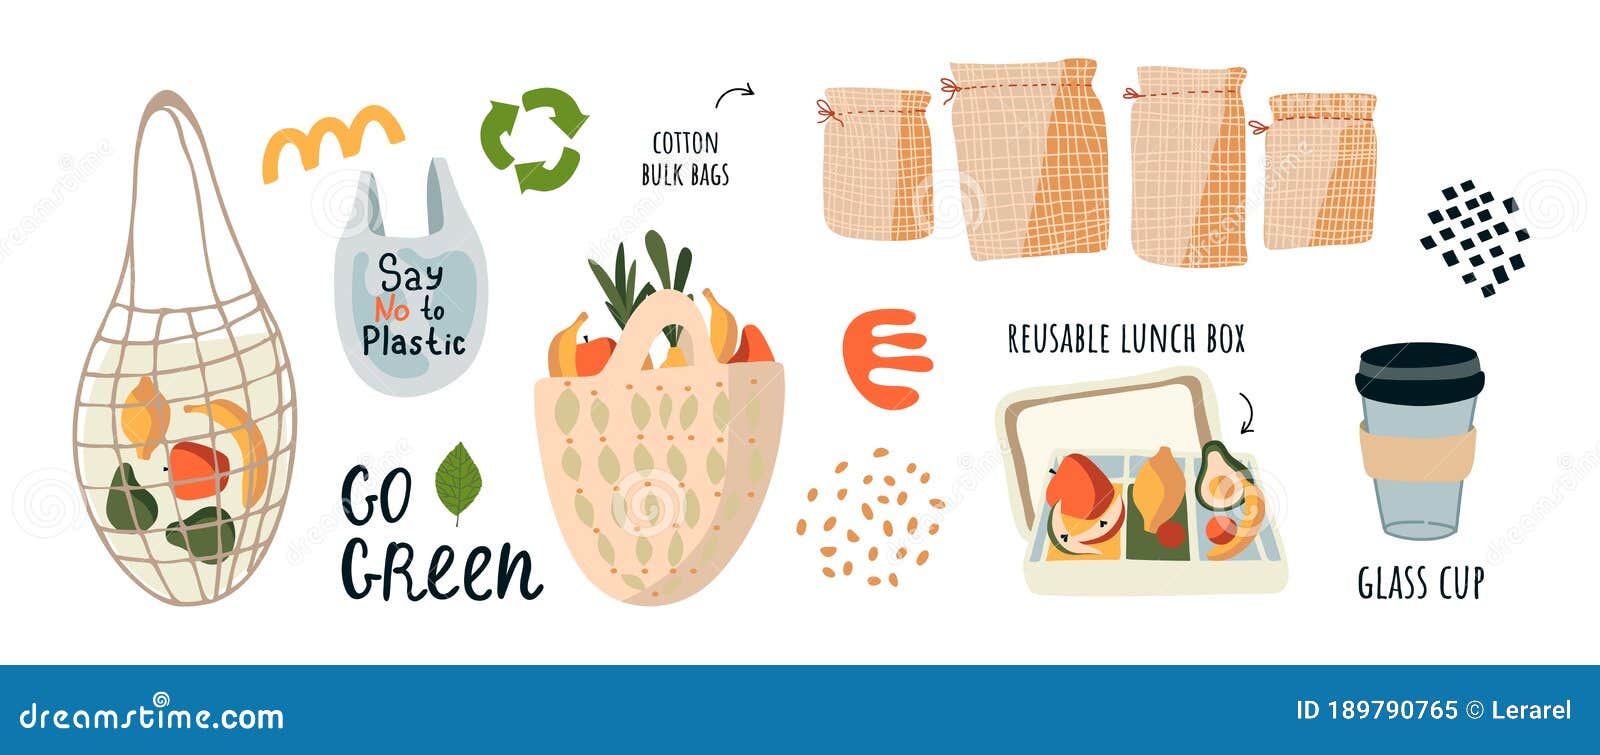 Go To Zero Waste, Without The Plastic Slogan Go Green. Reusable Eco Food Bags, A Set Of Cotton ...